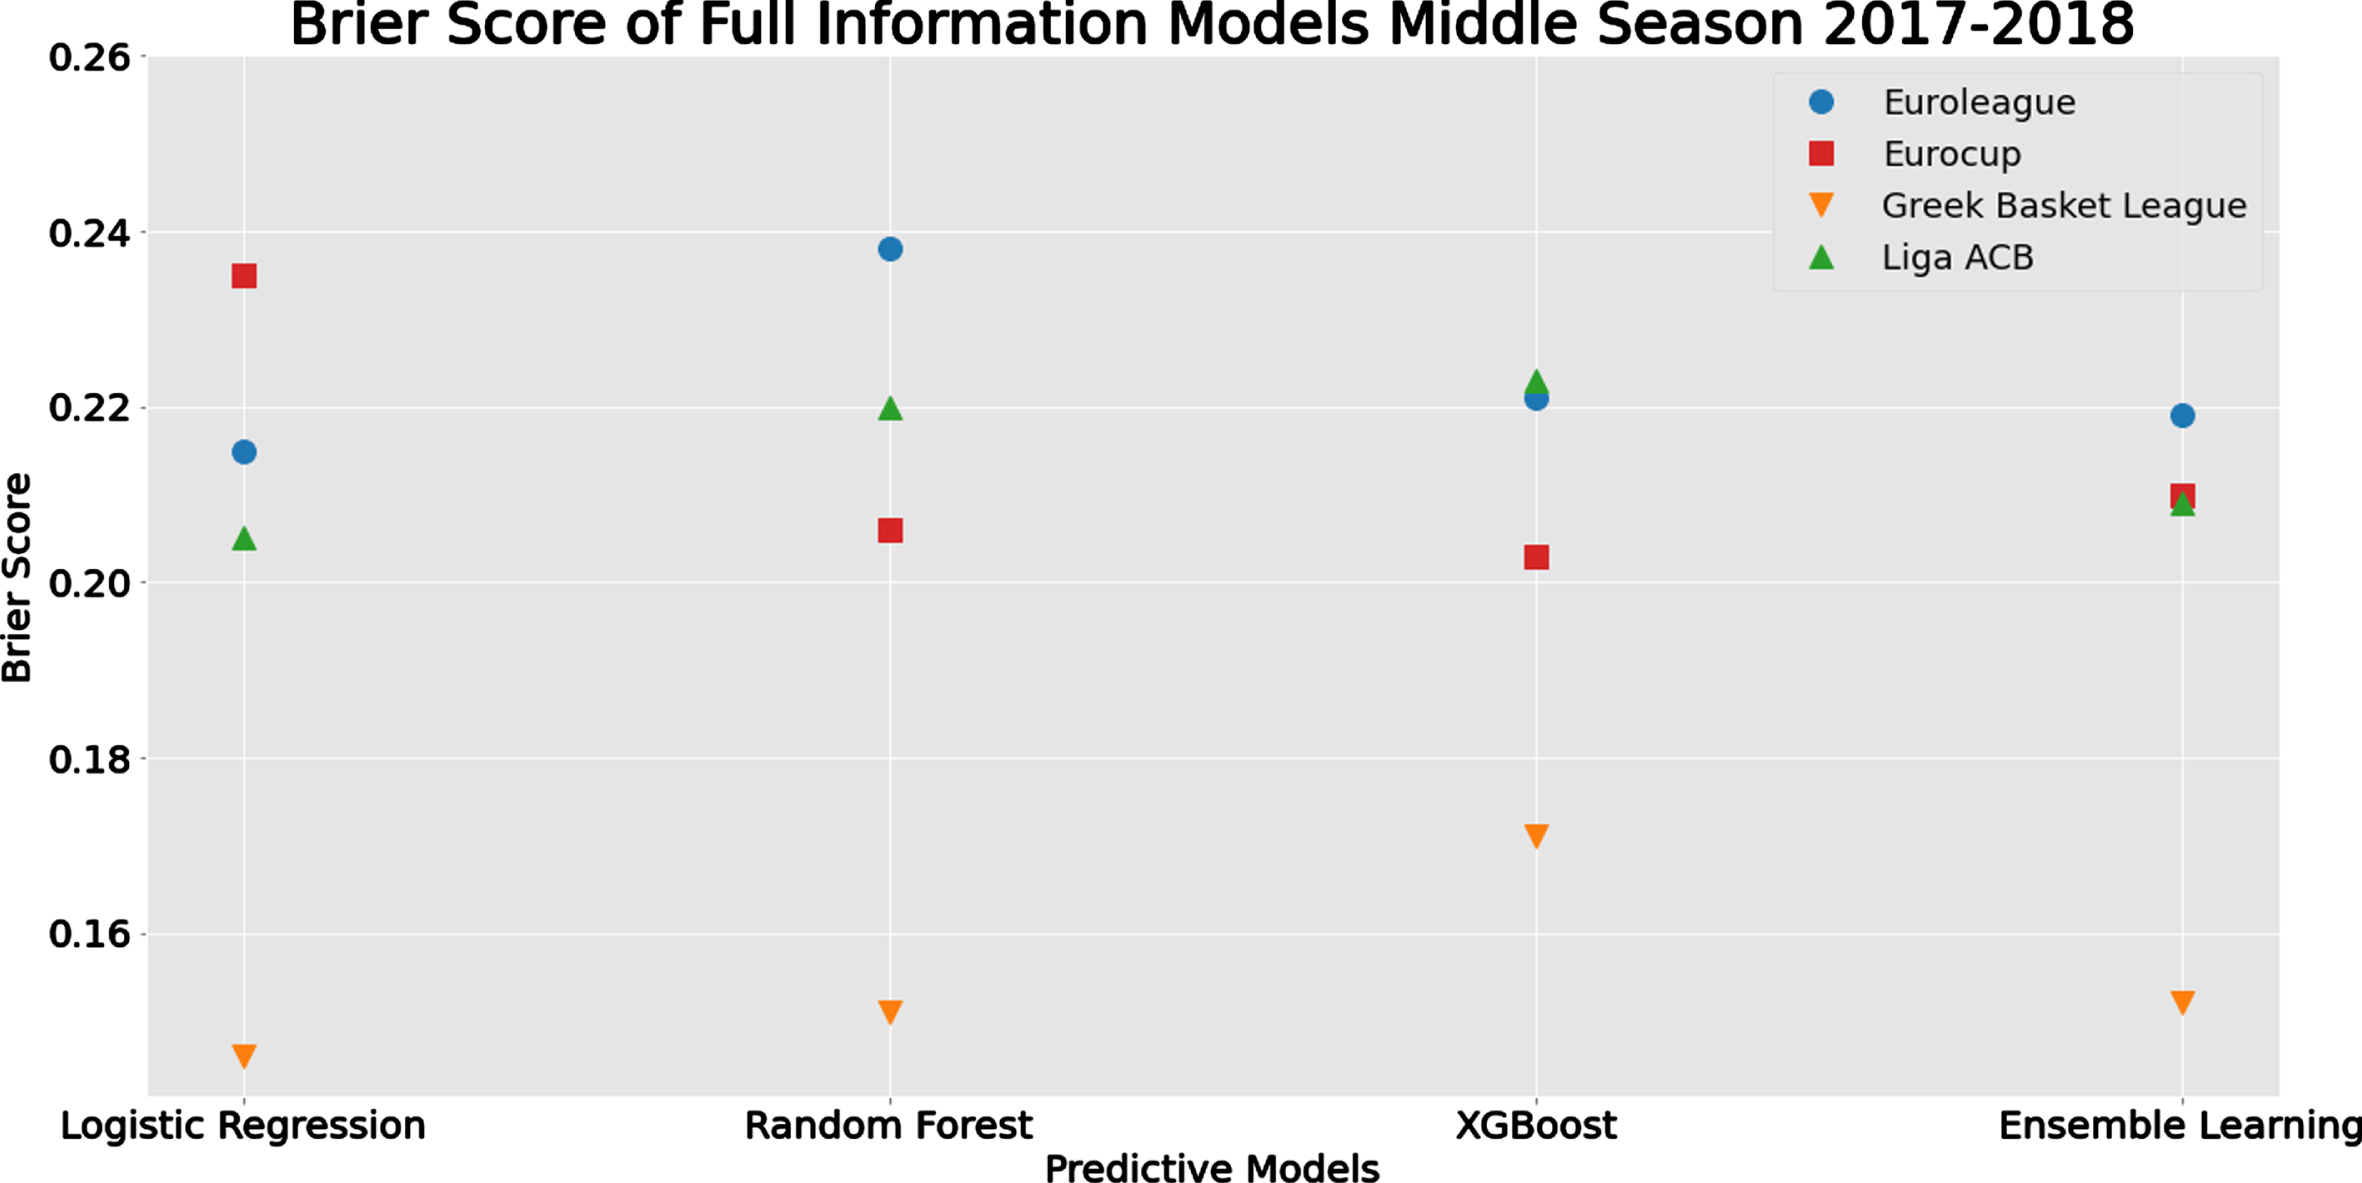 Comparison of methods and algorithms in terms of Brier Score for Full Information Models for each tournament for the mid-season prediction scenario.